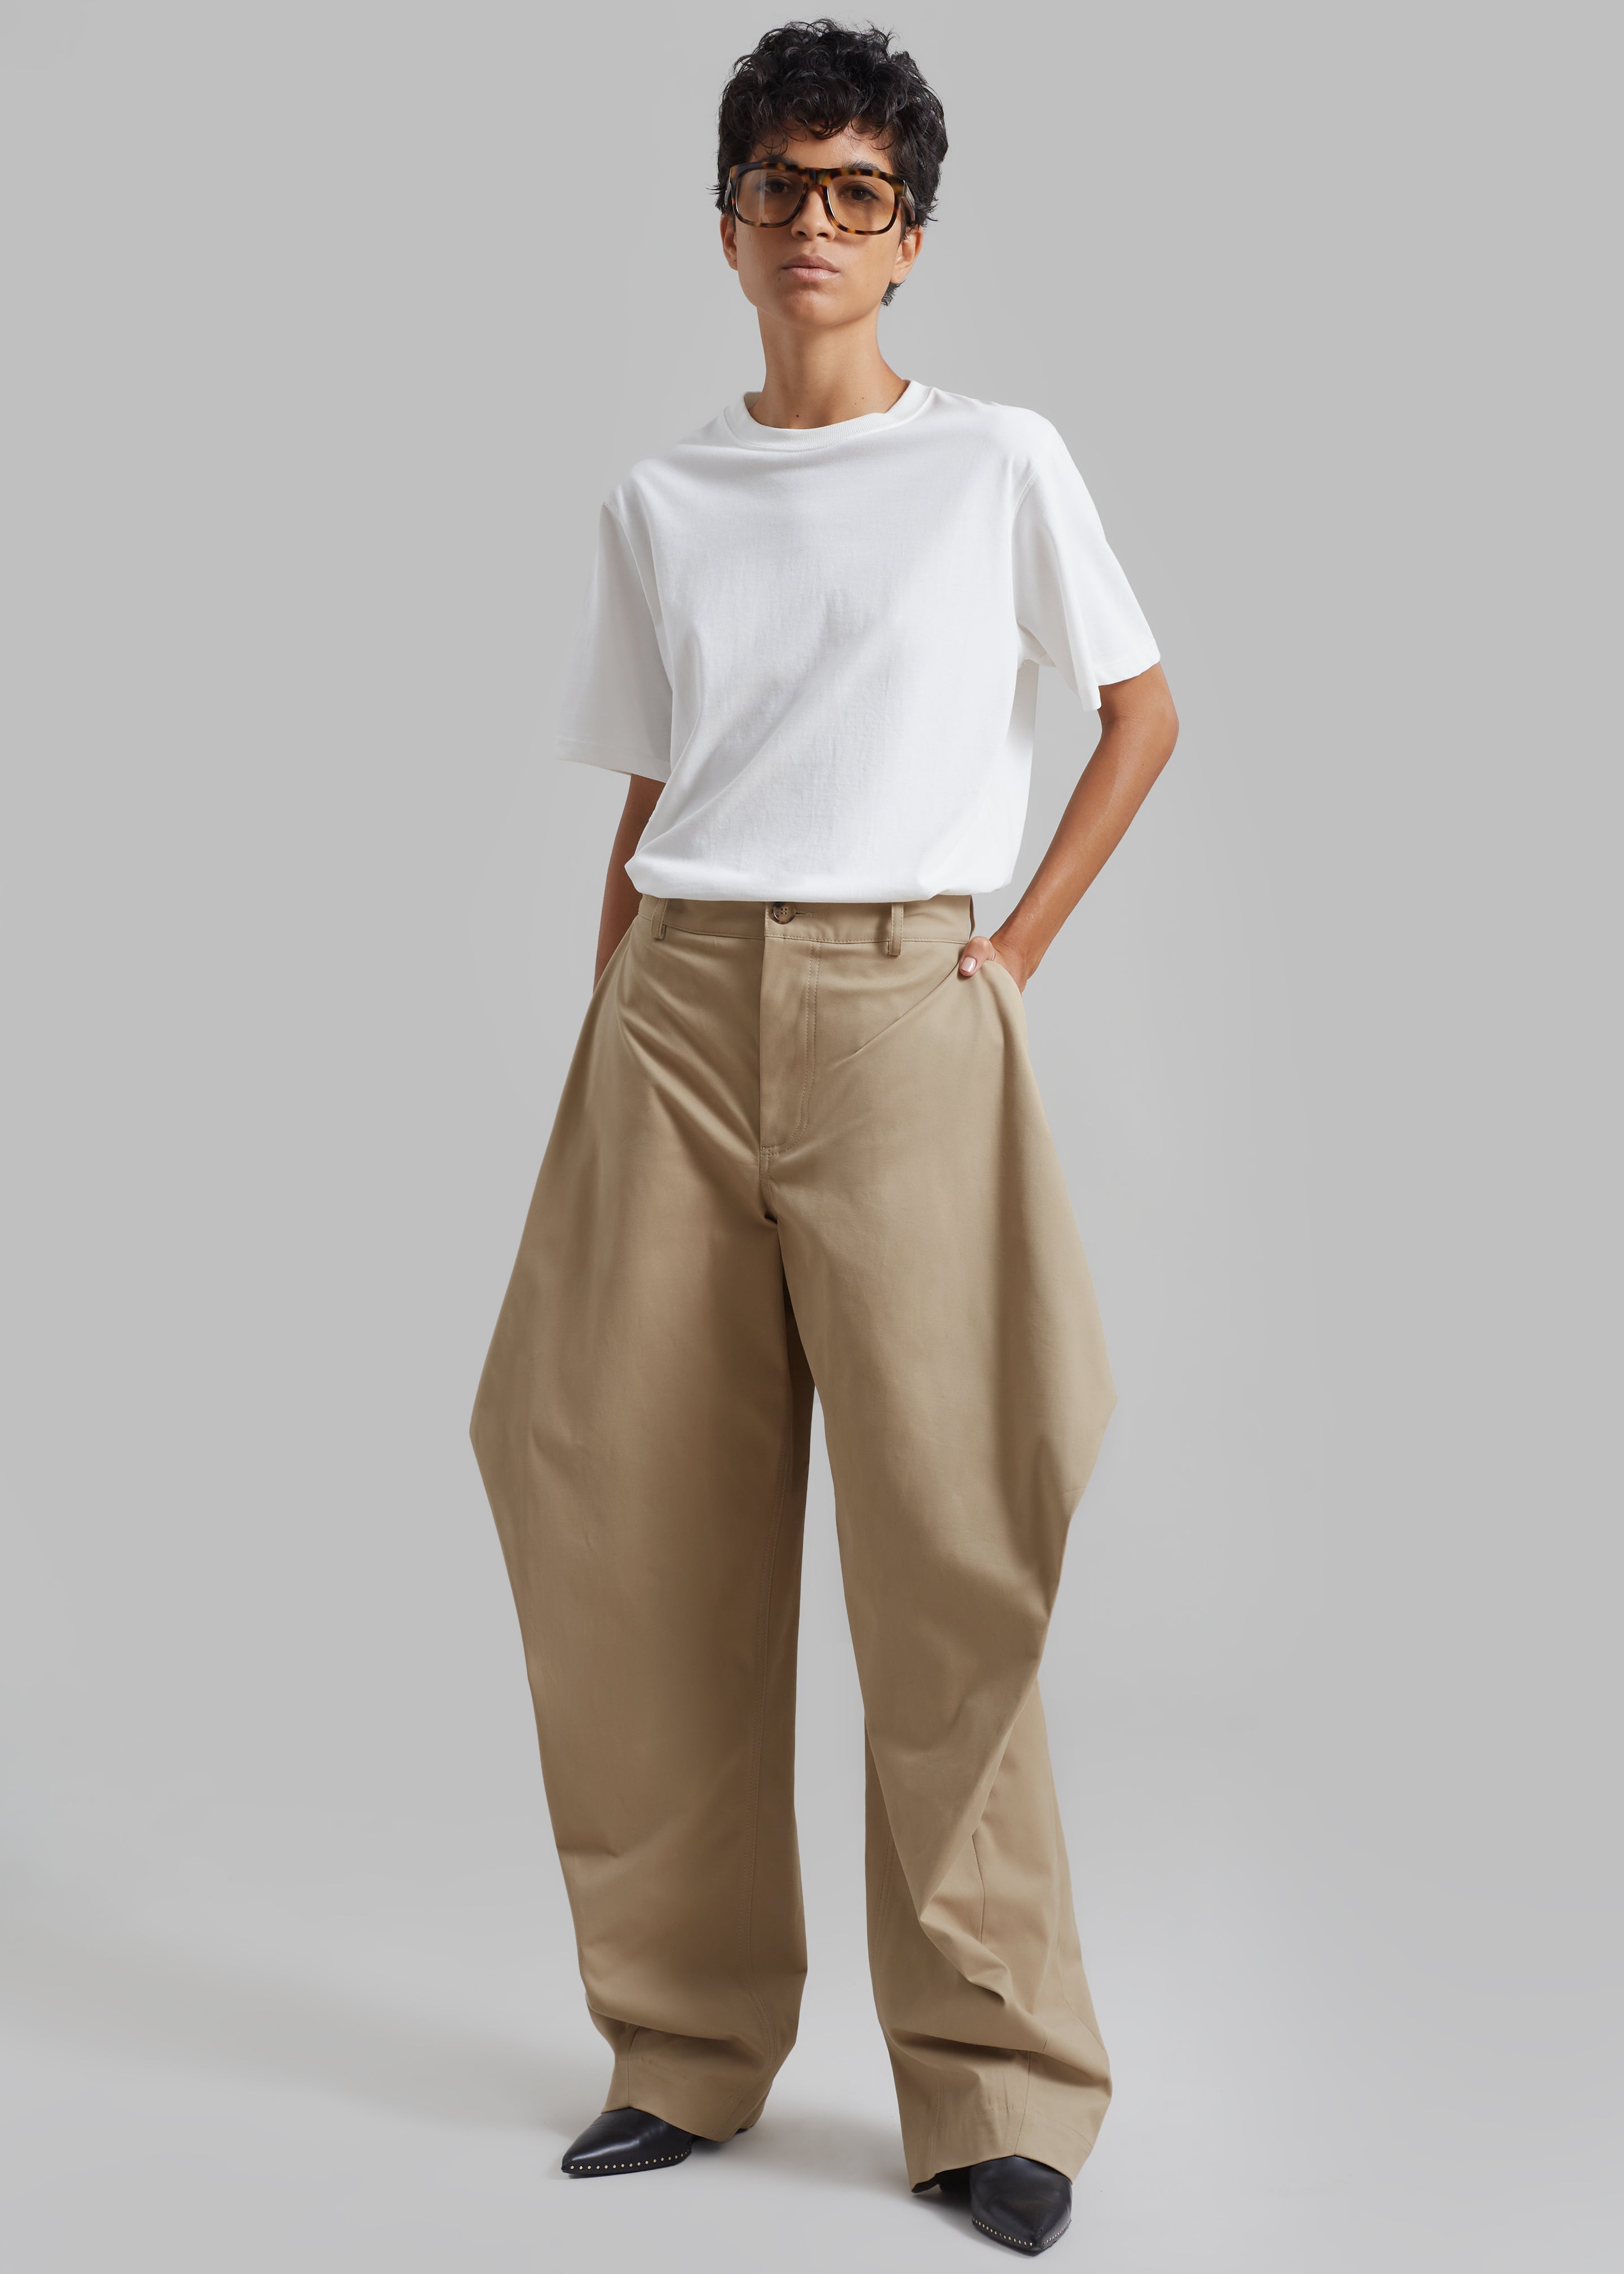 JW Anderson Kite Trousers - Flax - 1